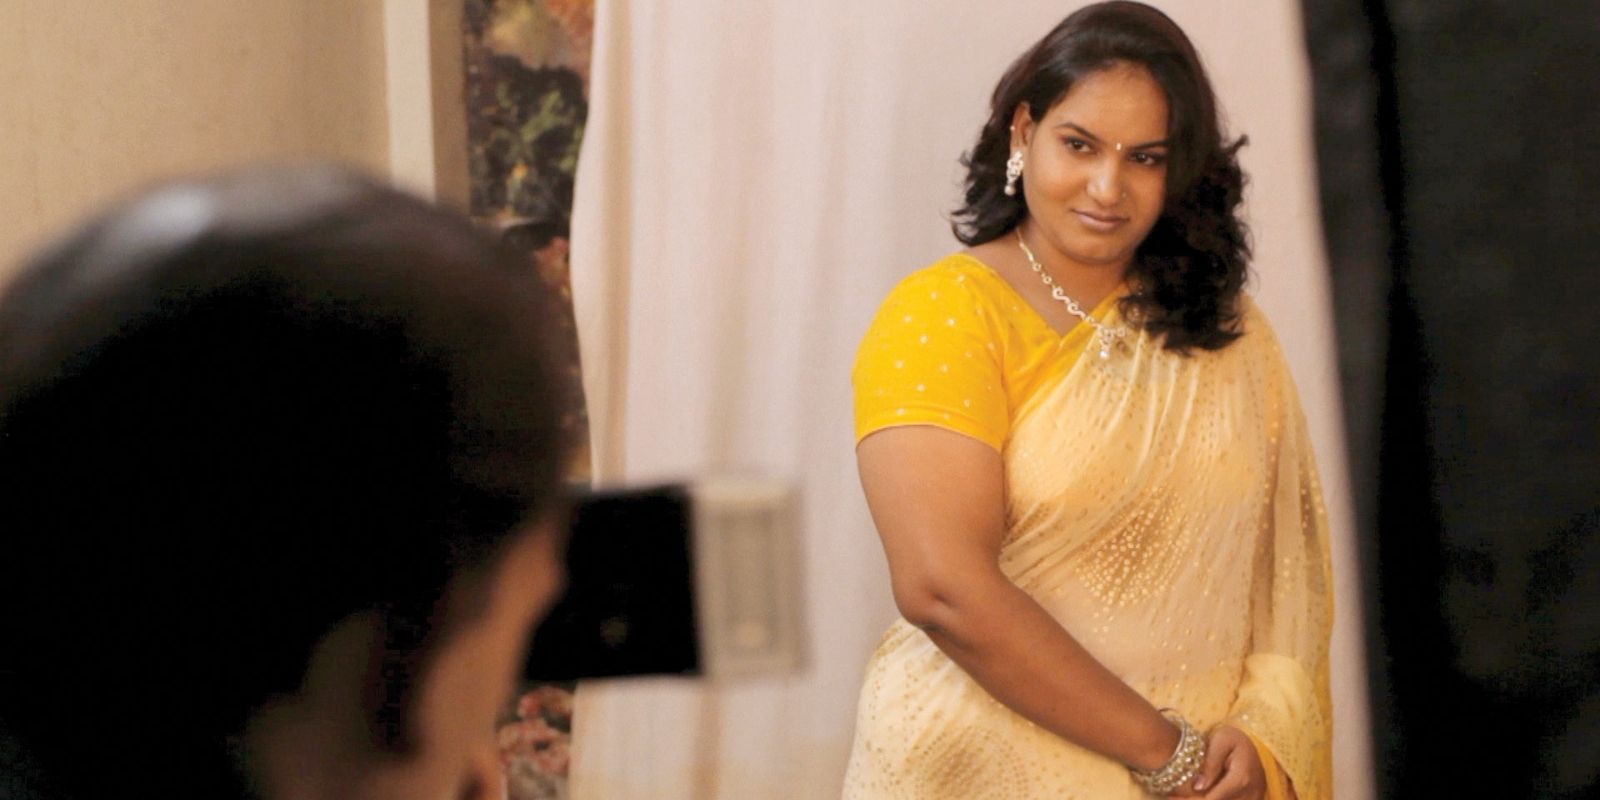 Indian Matchmaking: Everything we Know About Matchmaker Sima Taparia